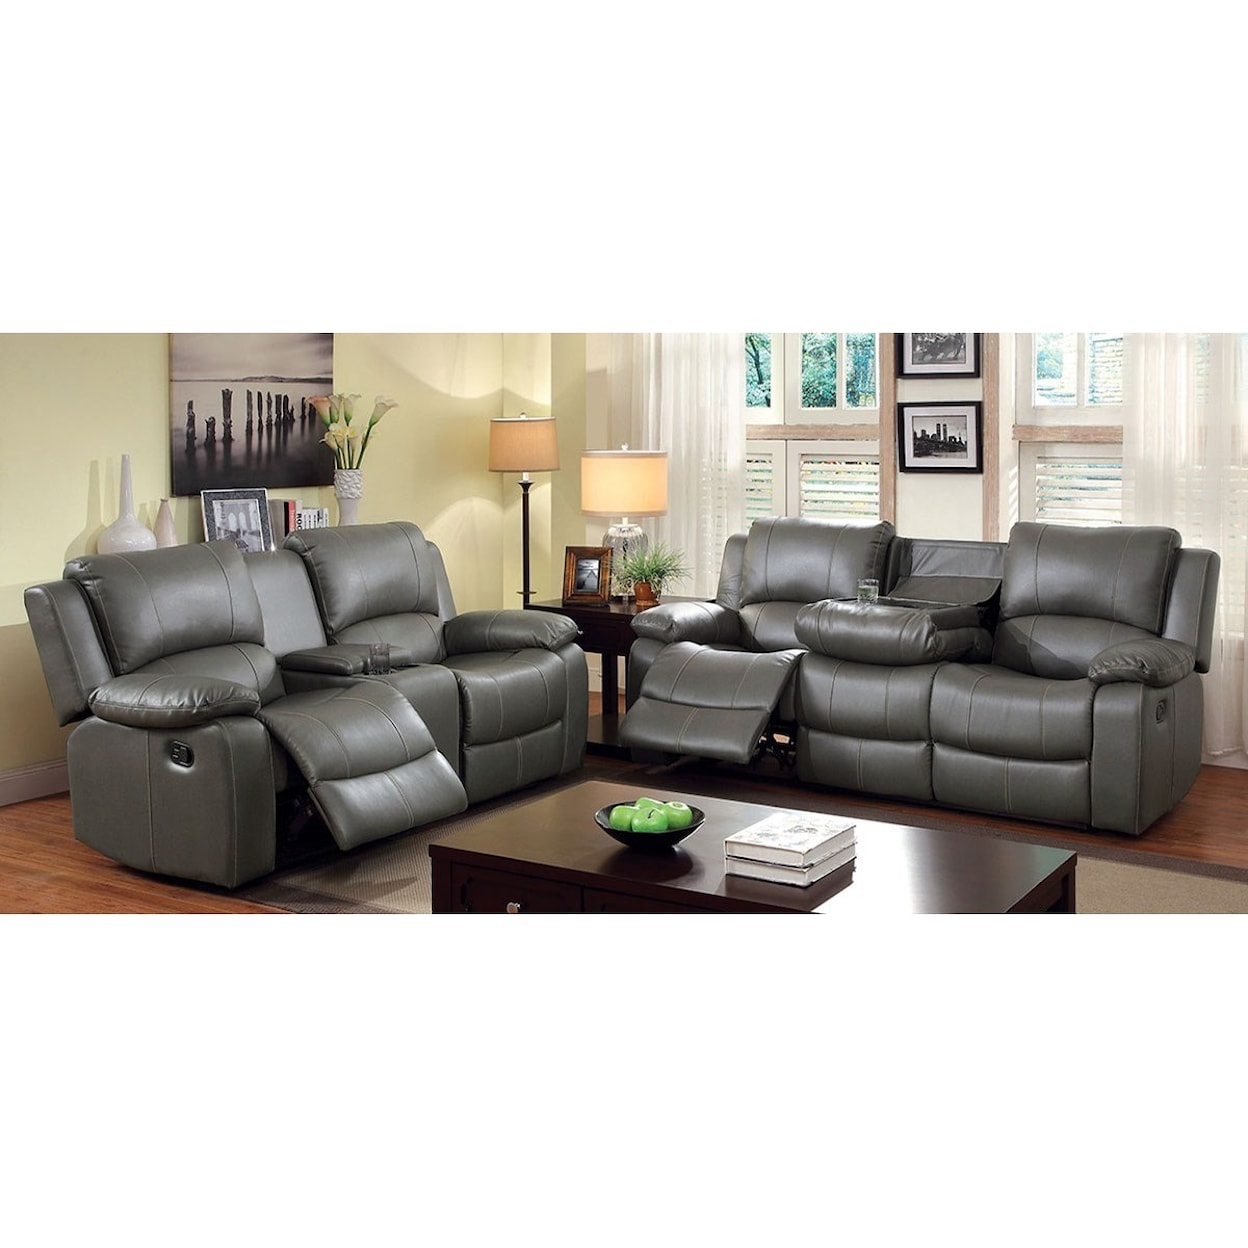 Furniture of America Sarles Reclining Living Room Group